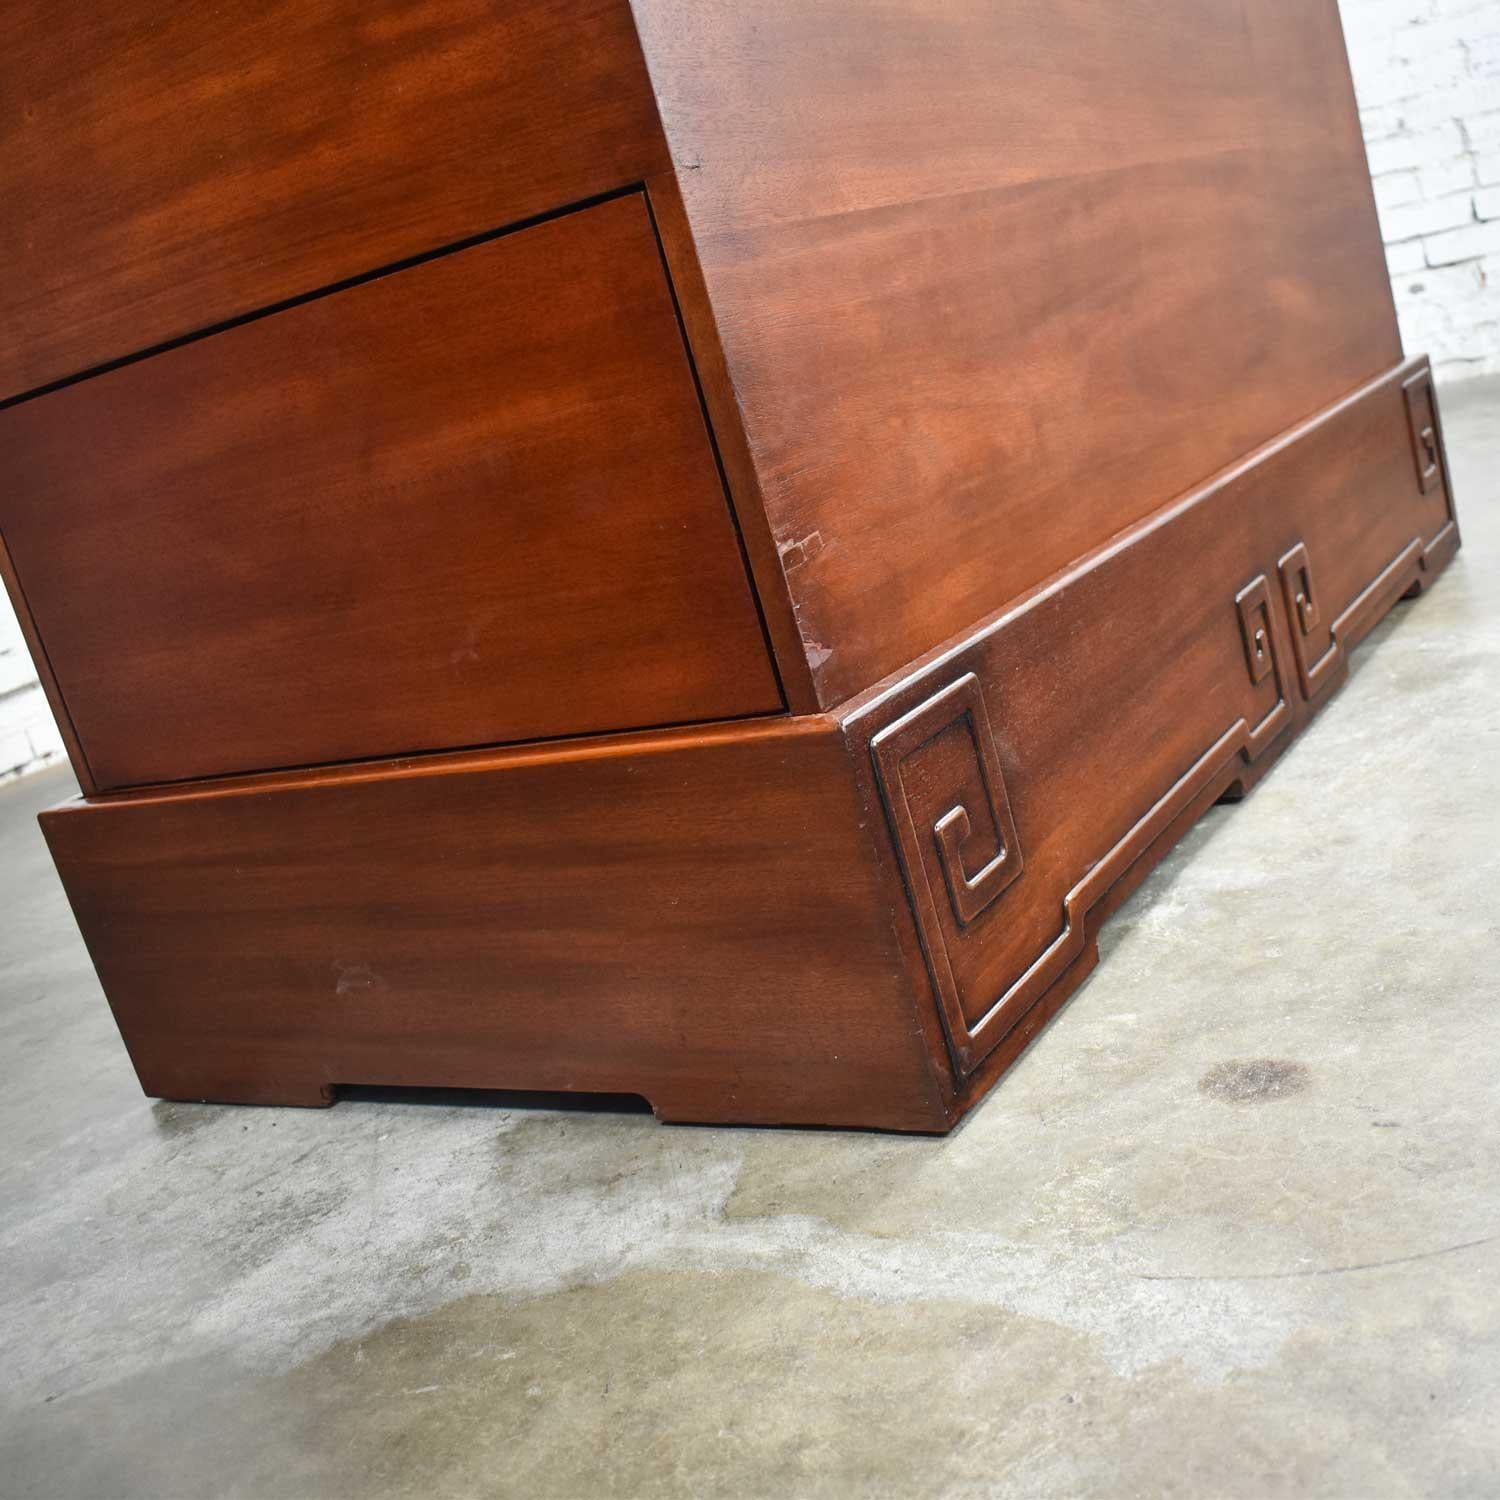 Art Deco Style Mahogany Entry Desk or Bar by IMA S.A. Bogota, Colombia For Sale 5